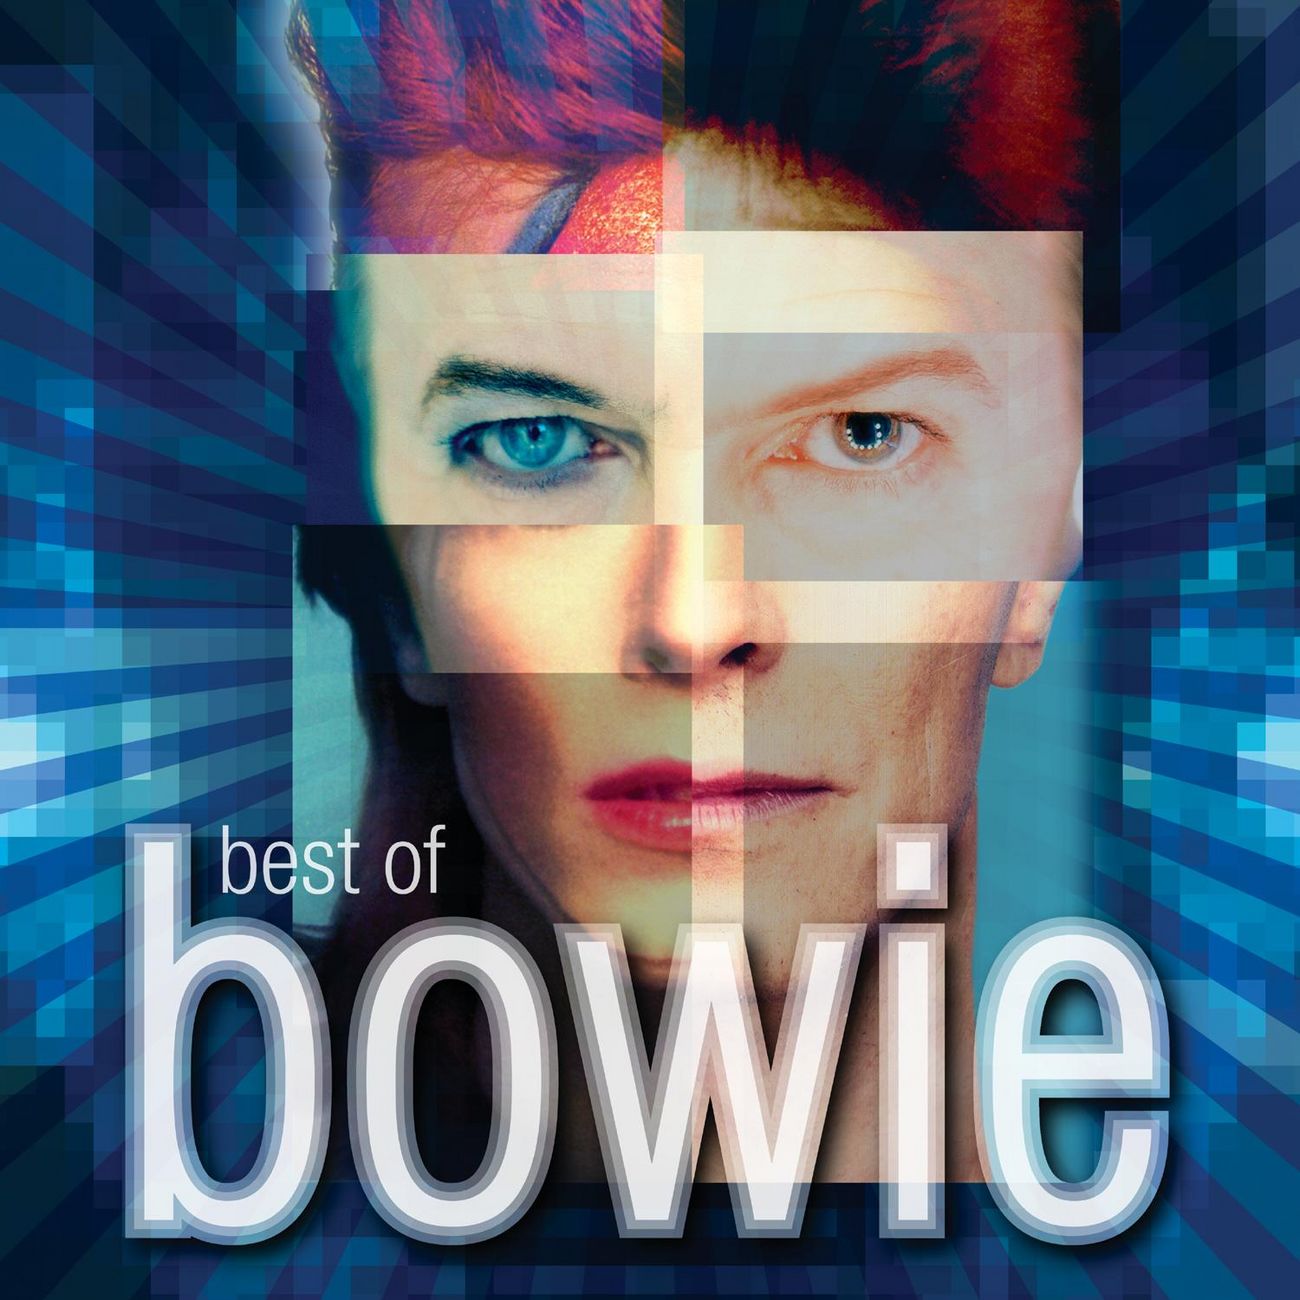 Best of Bowie (Deluxe edition)